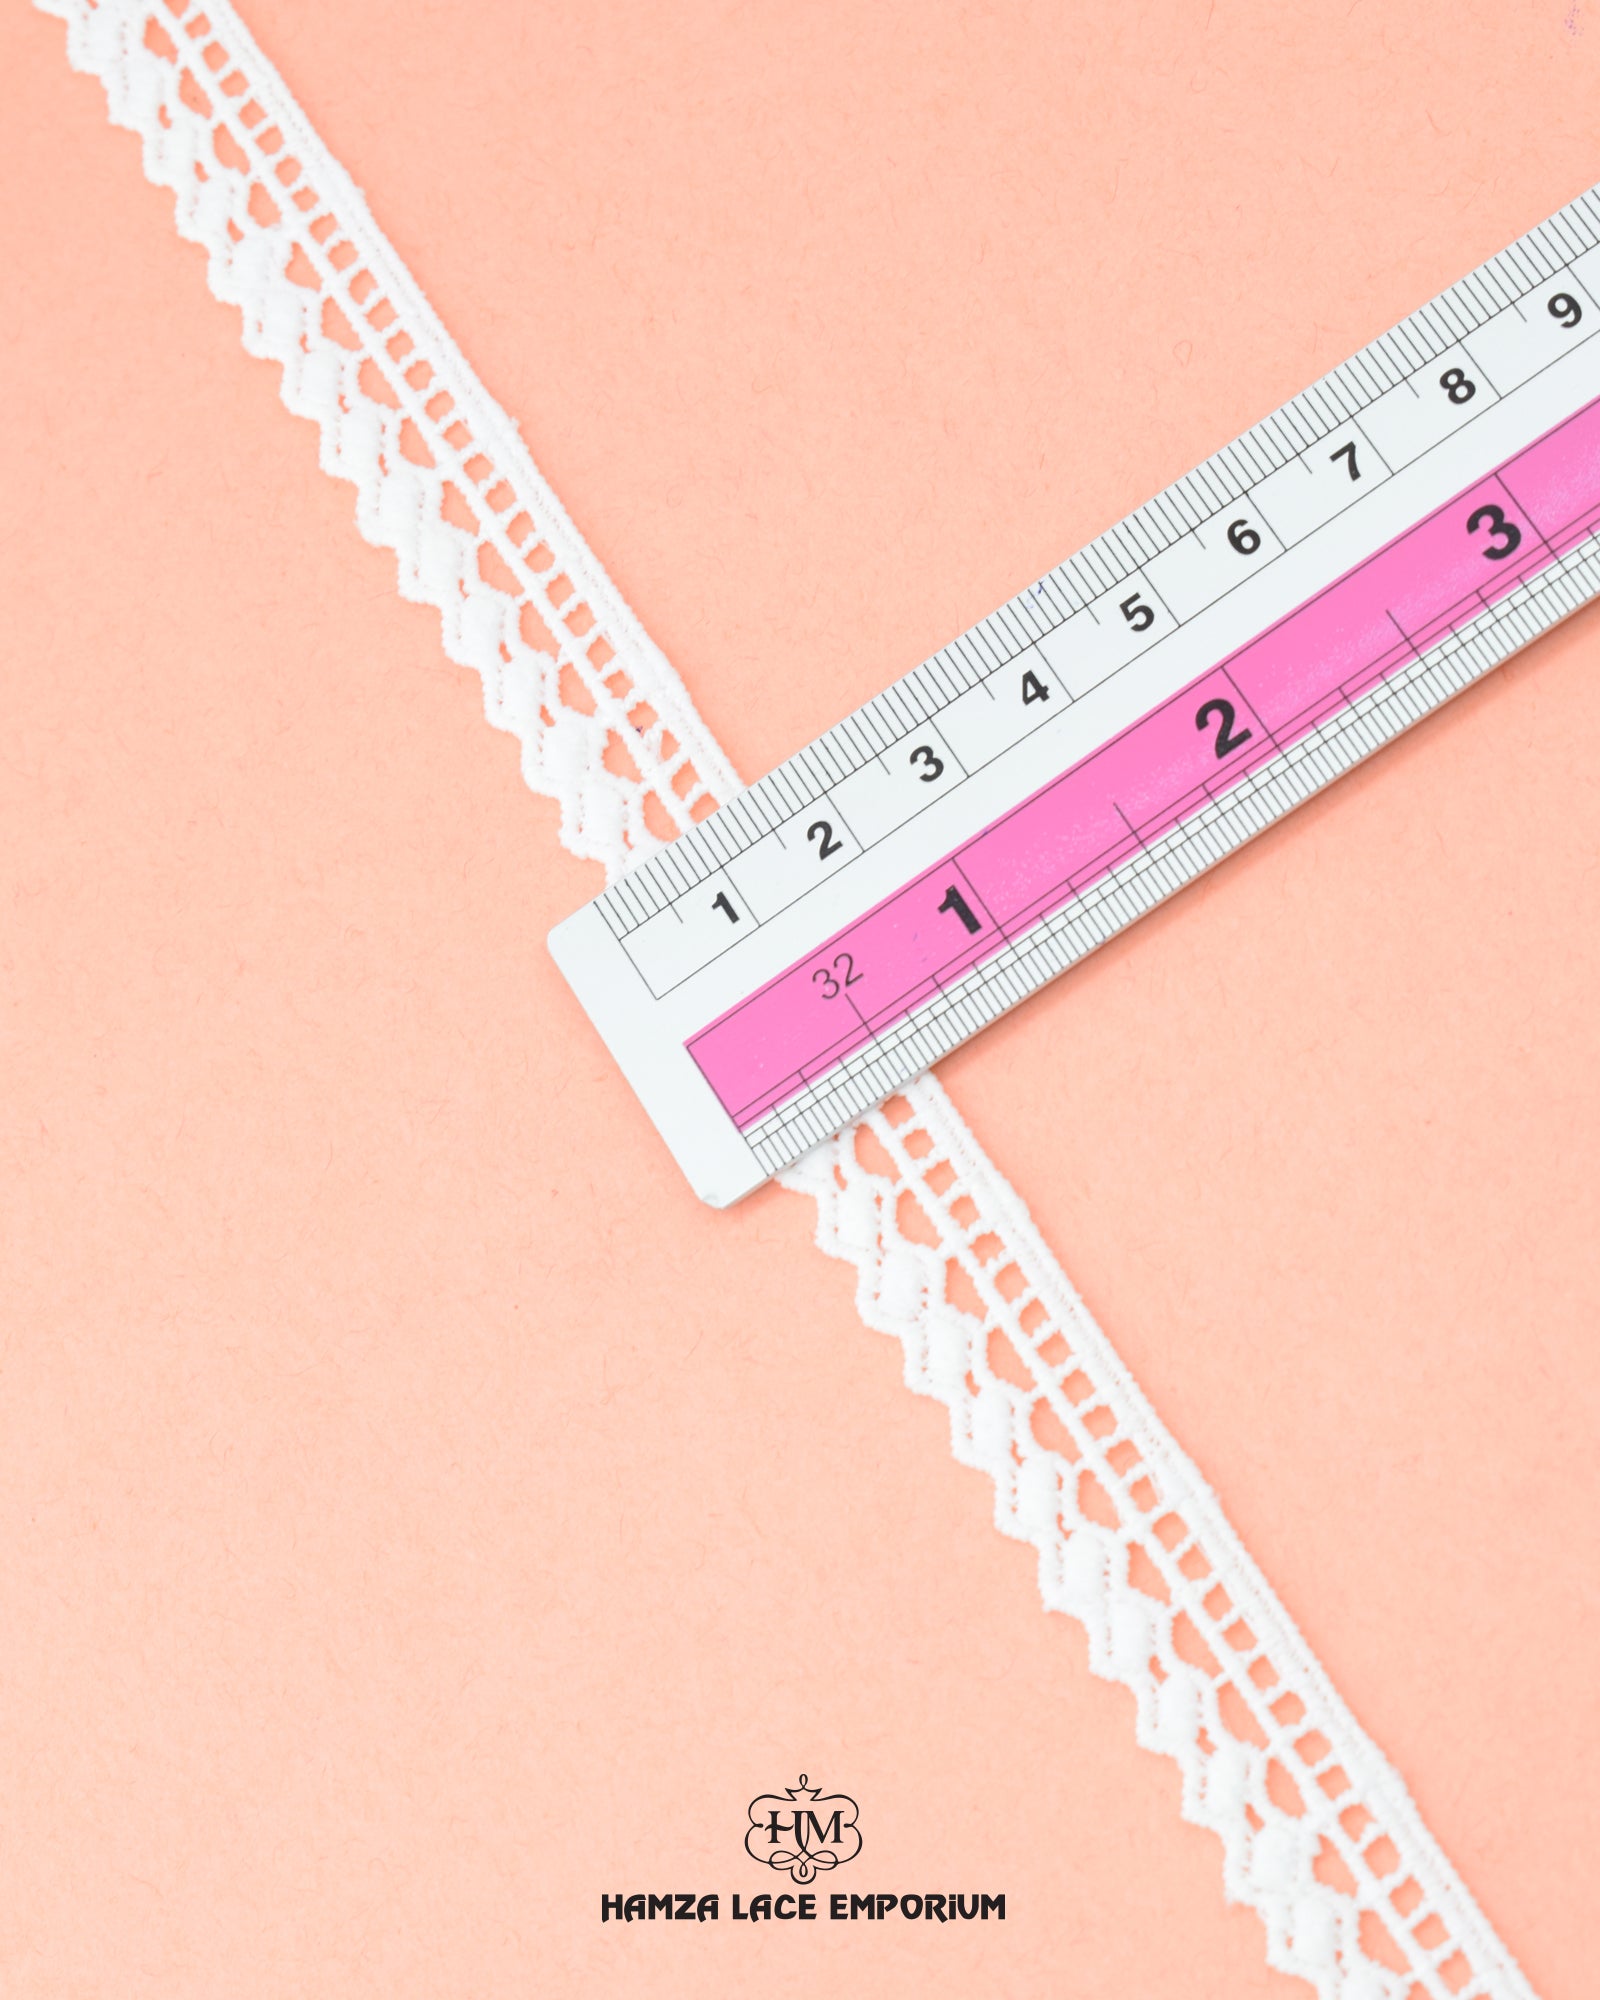 Size of the 'Edging Lace 2439' is shown as '0.5' inches with the help of a ruler